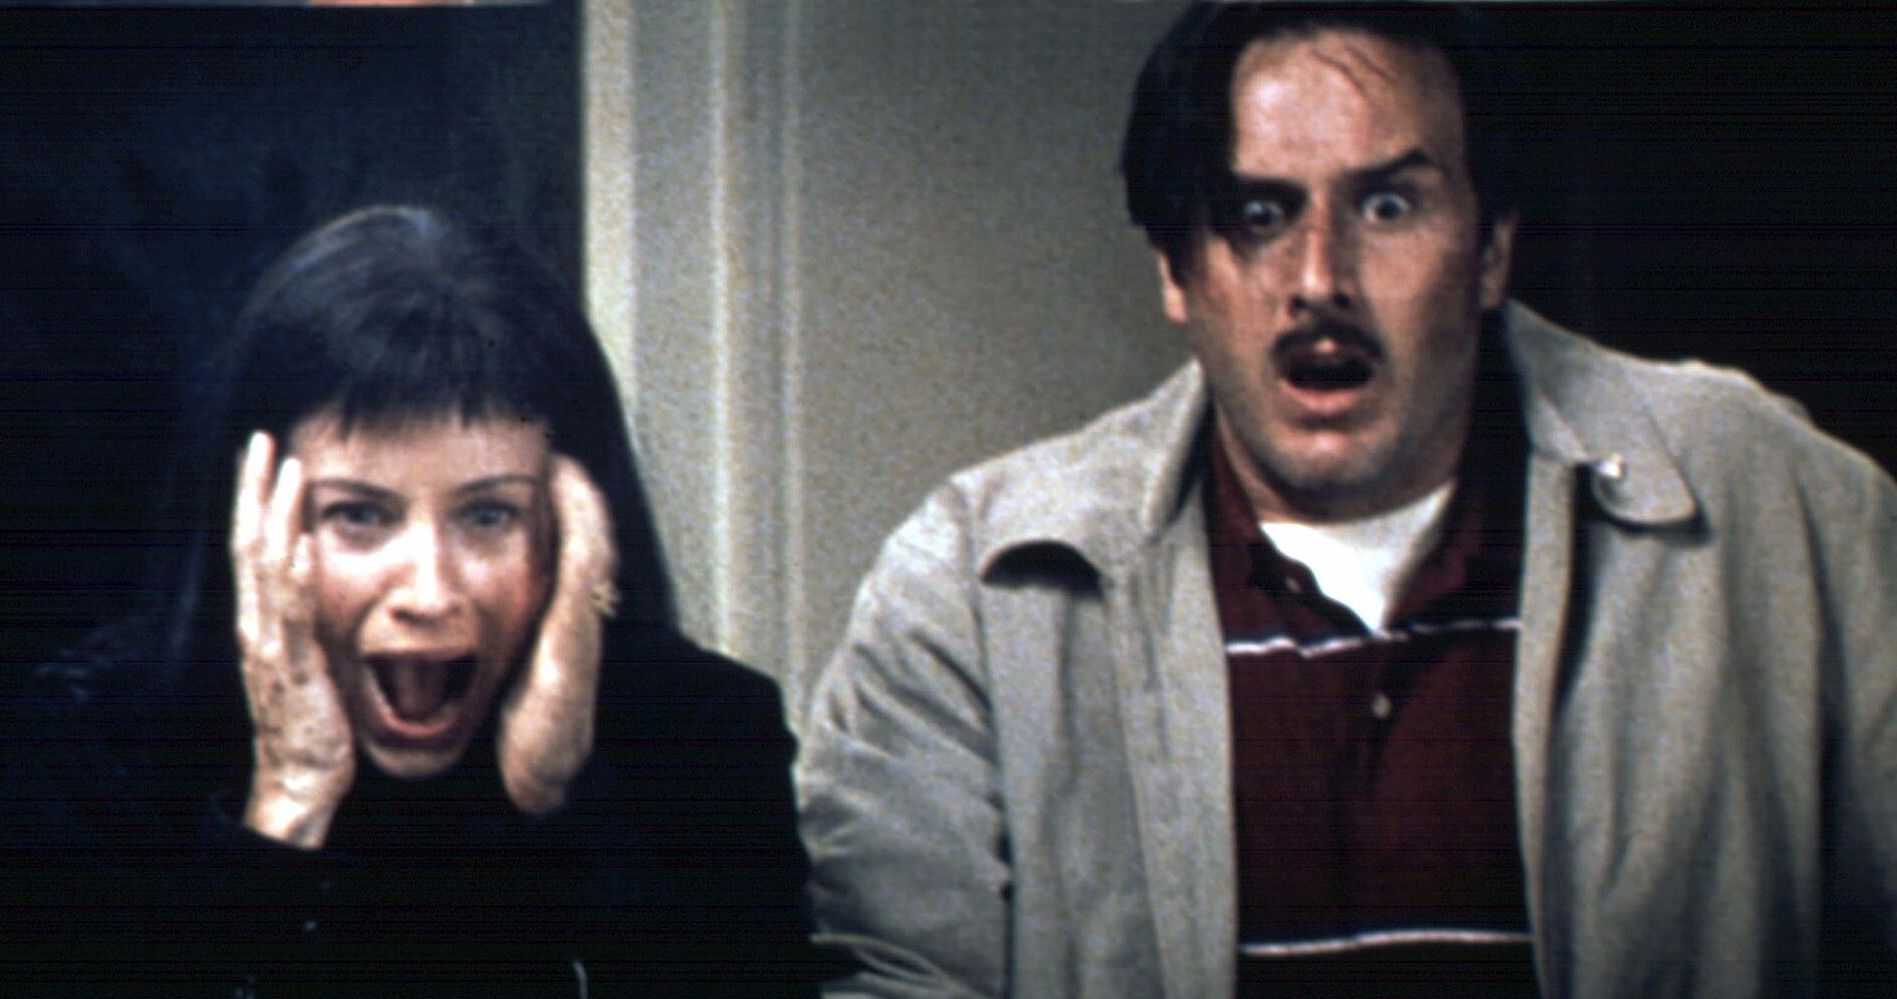 David Arquette Claims Responsibility for Courteney Cox's Infamous Scream 3 Bangs